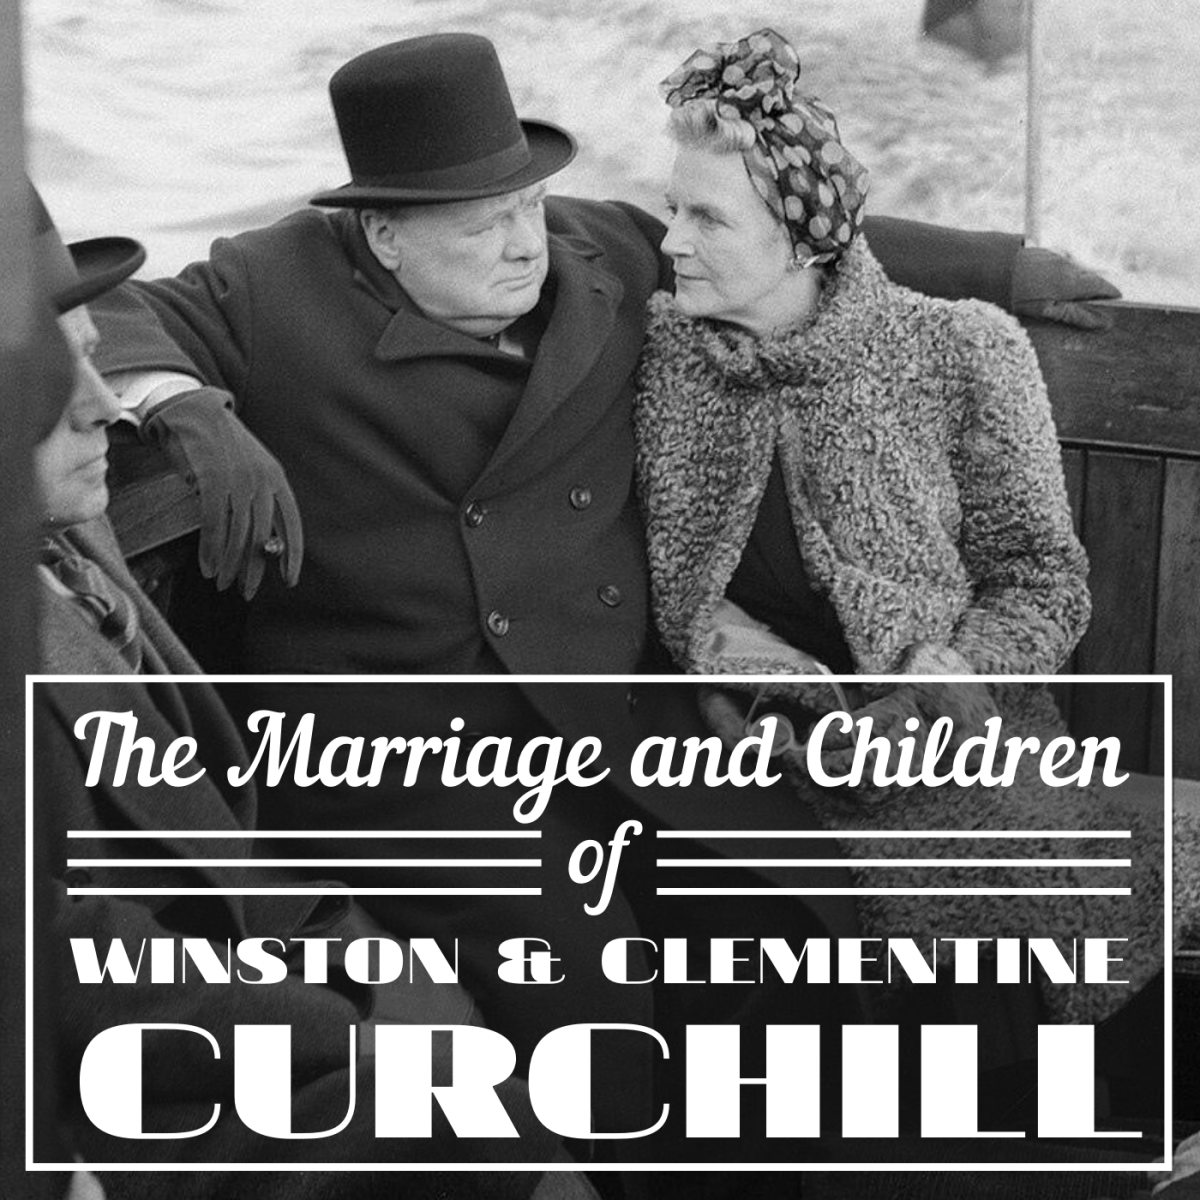 The Marriage and Children of Winston and Clementine Churchill